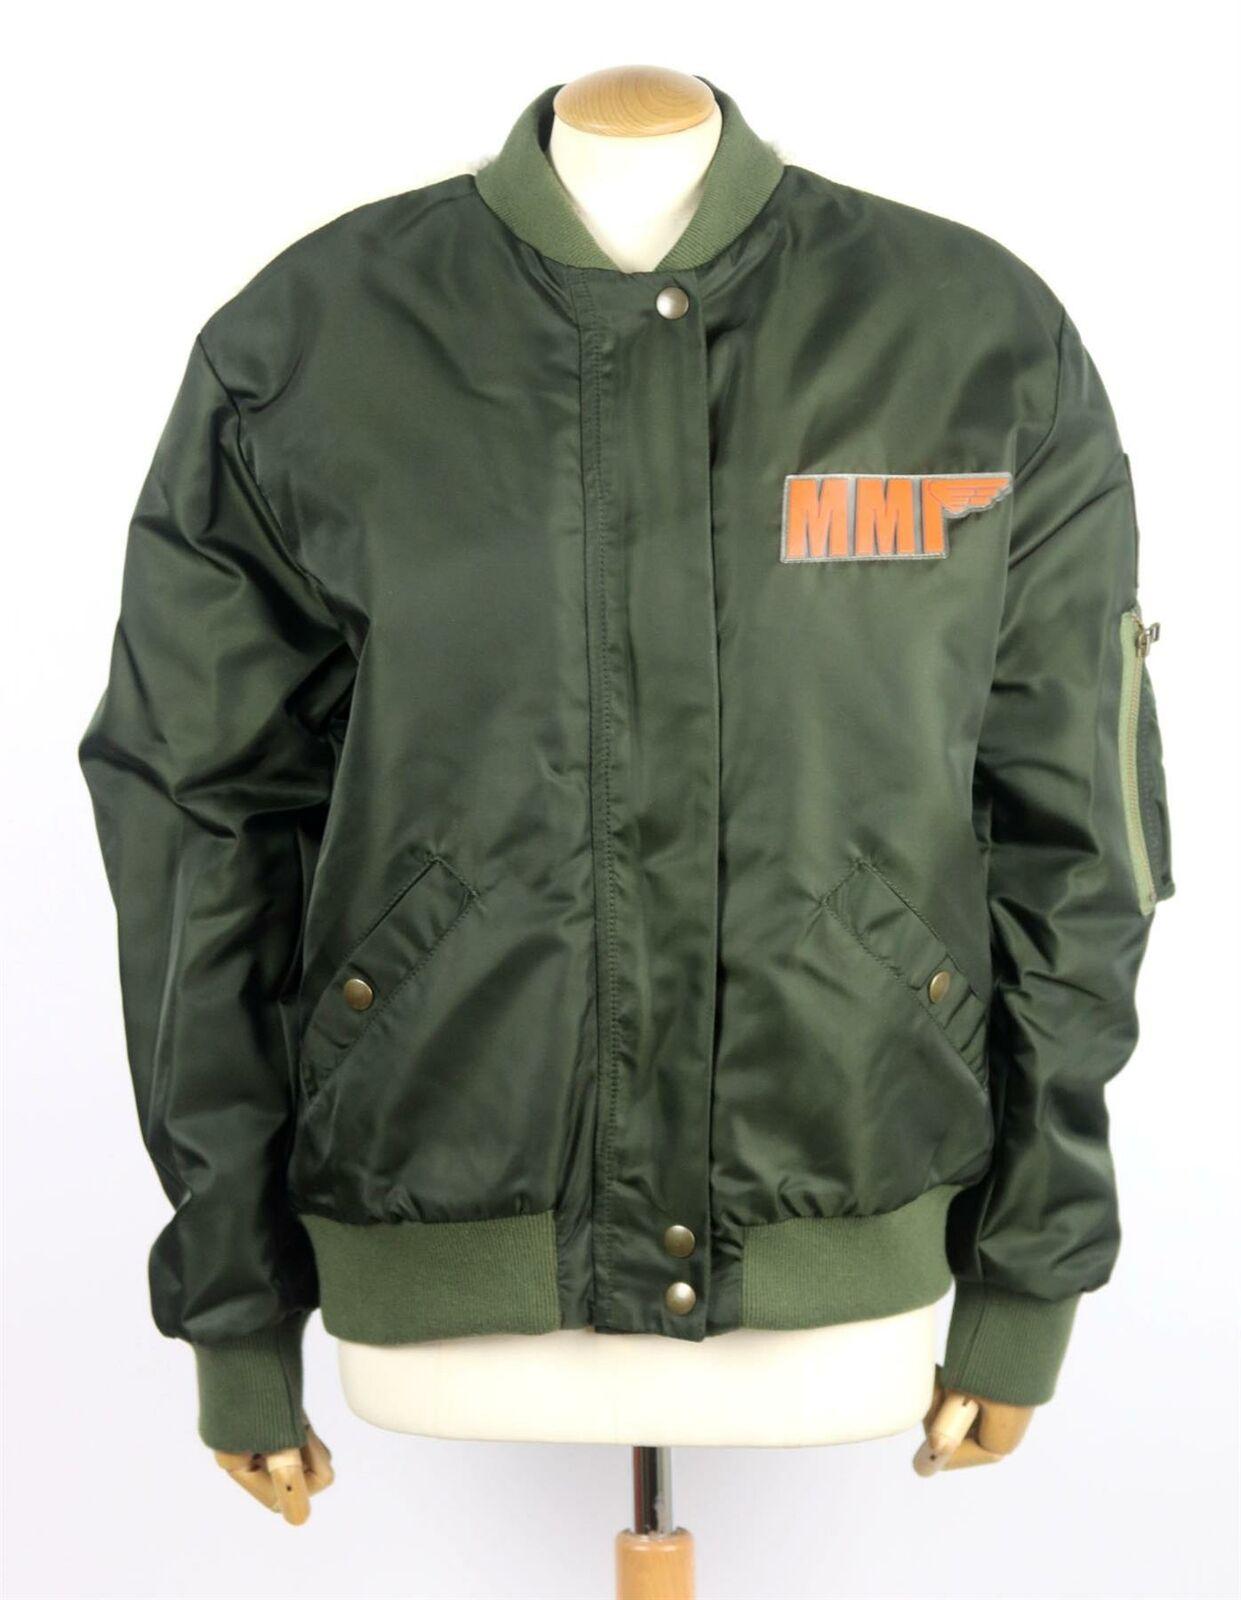 This Mr & Mrs Italy jacket has been cut from lightweight shell, this bomber jacket is embroidered with a snake detail on the back, arranged to form kaleidoscopic effect, the design is outlined by a shearling trim, it adds some edge to a classic